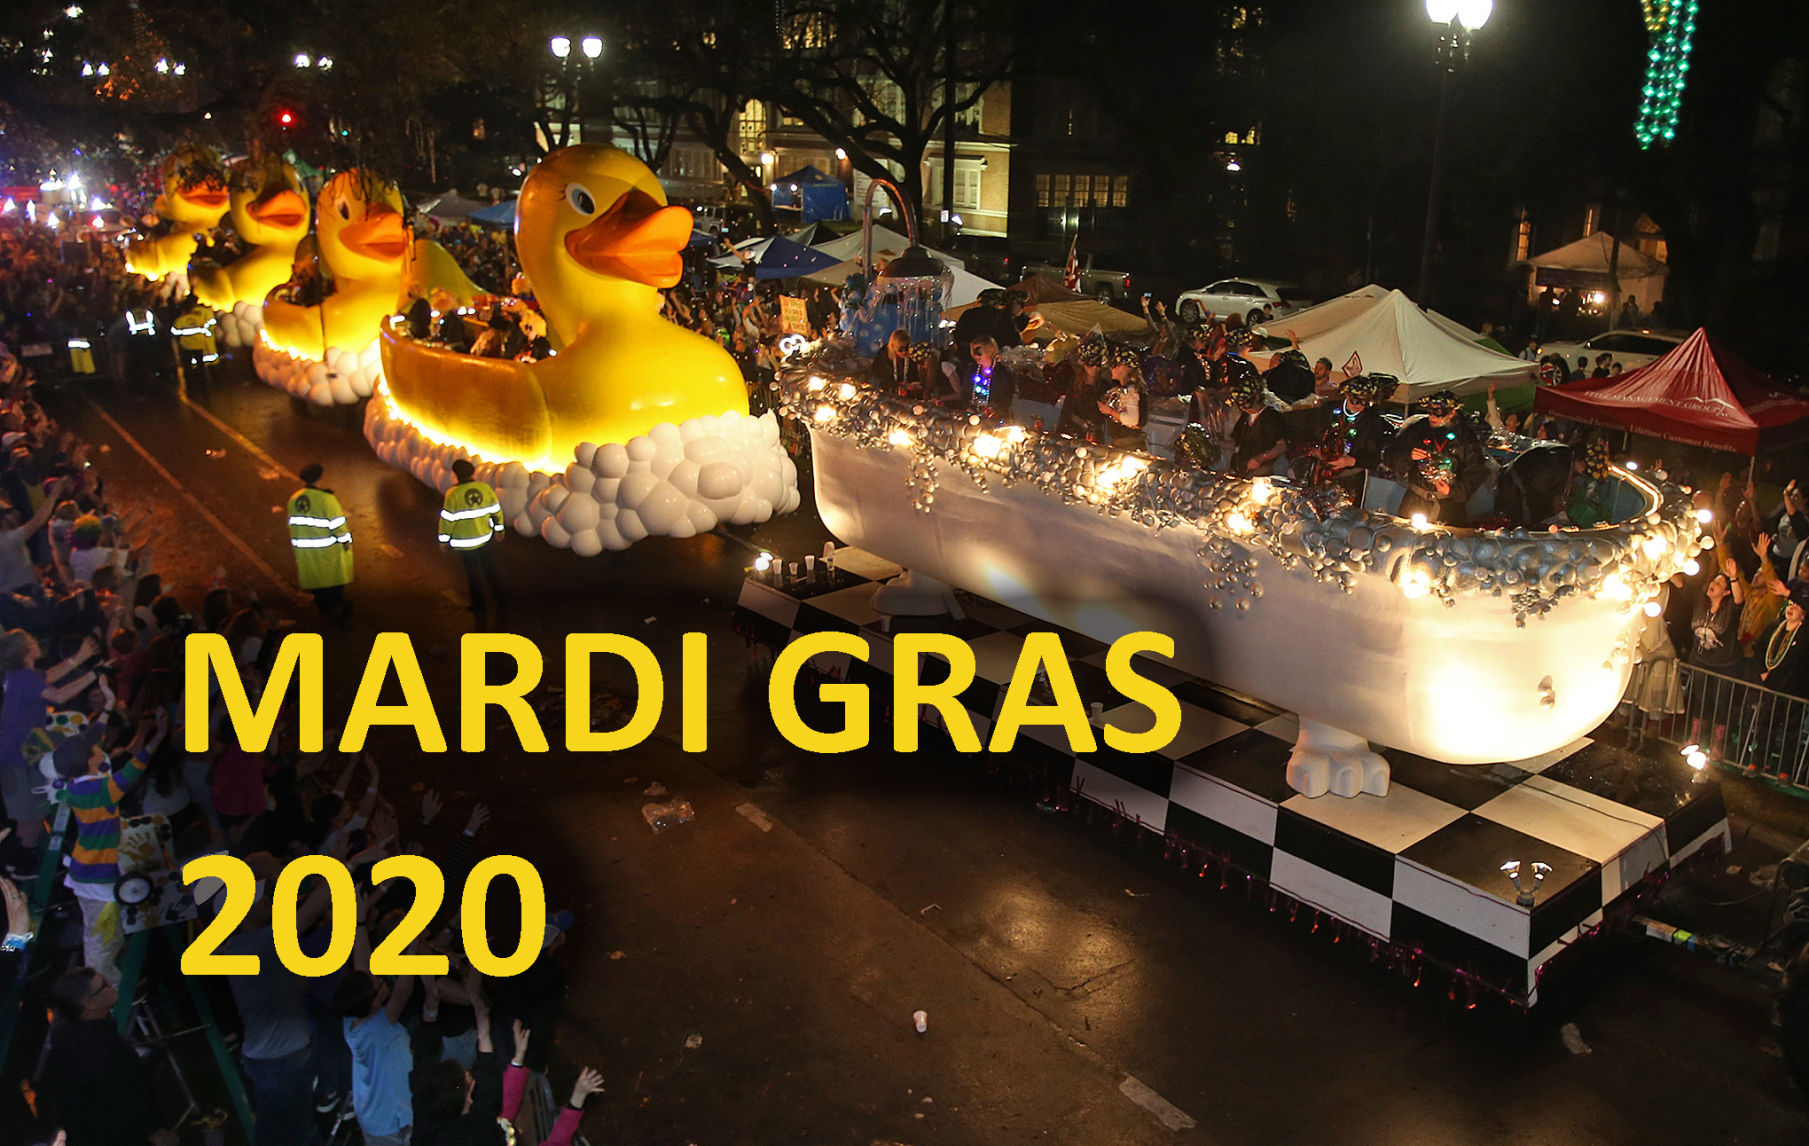 Mardi Gras 2020 The complete parade schedule from Joan of Arc to Zulu Mardi Gras nola image photo